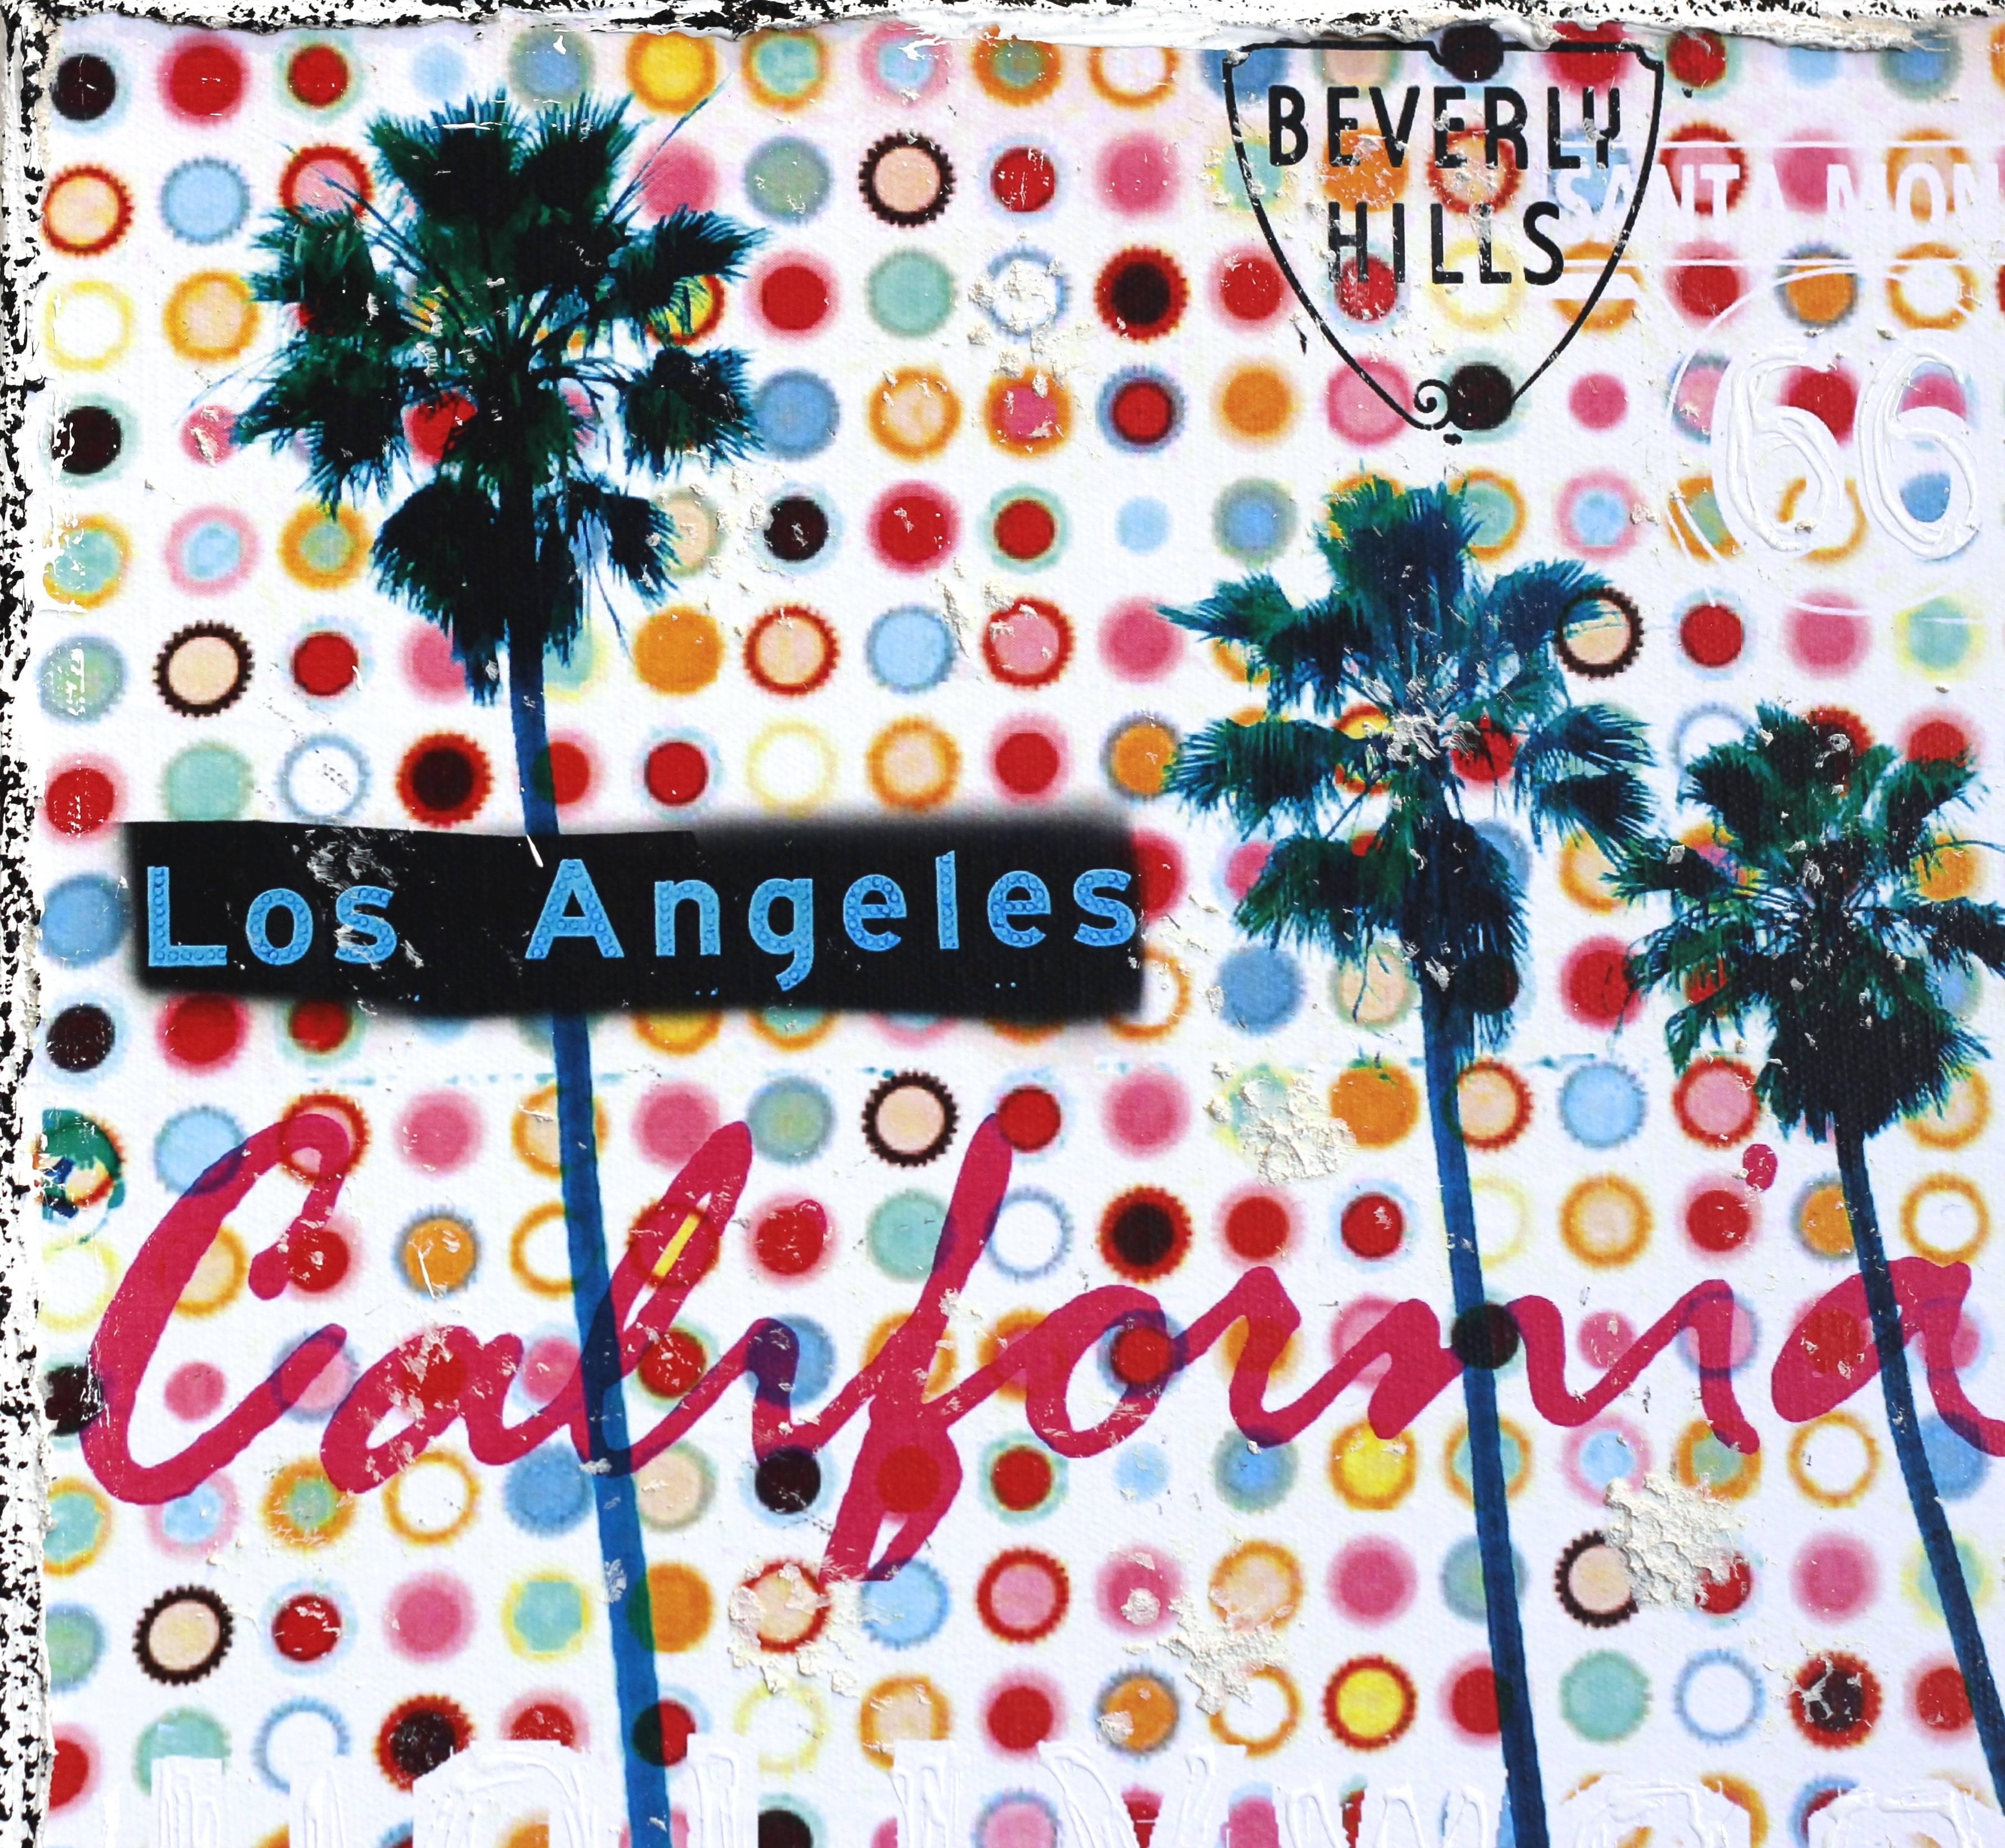 California Dreaming  - Pop Art Painting by Marion Duschletta